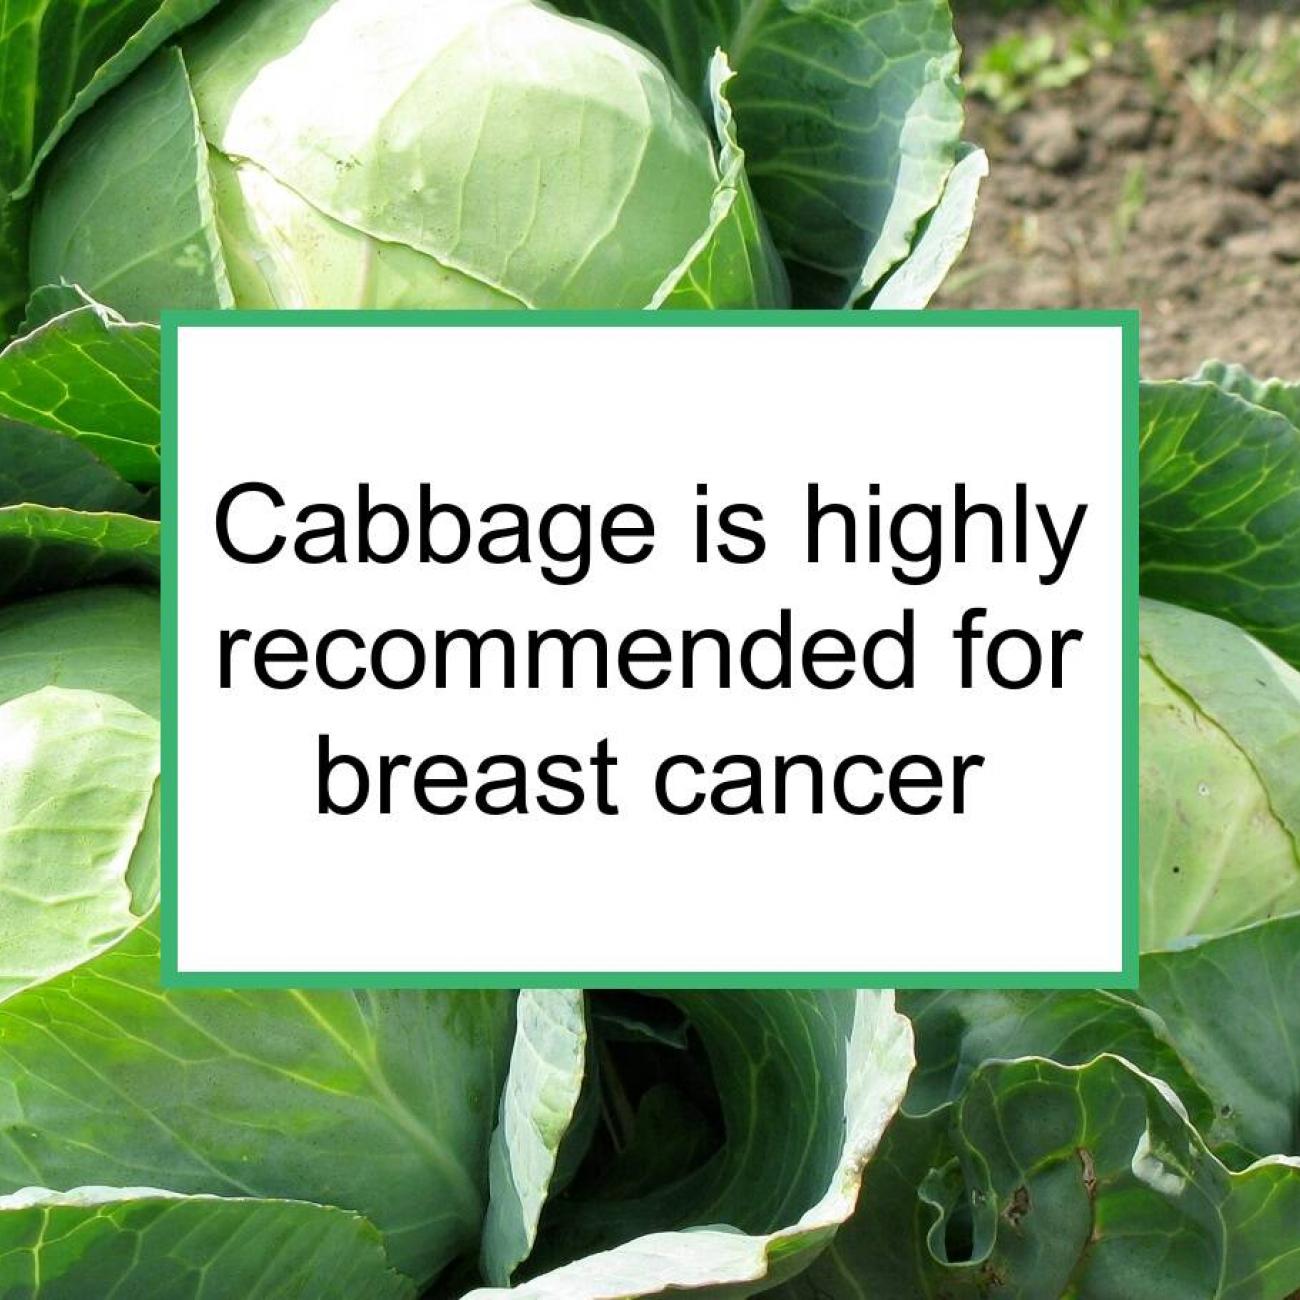 Nutritious Negligee: The Cabbage Bra is Edible Support